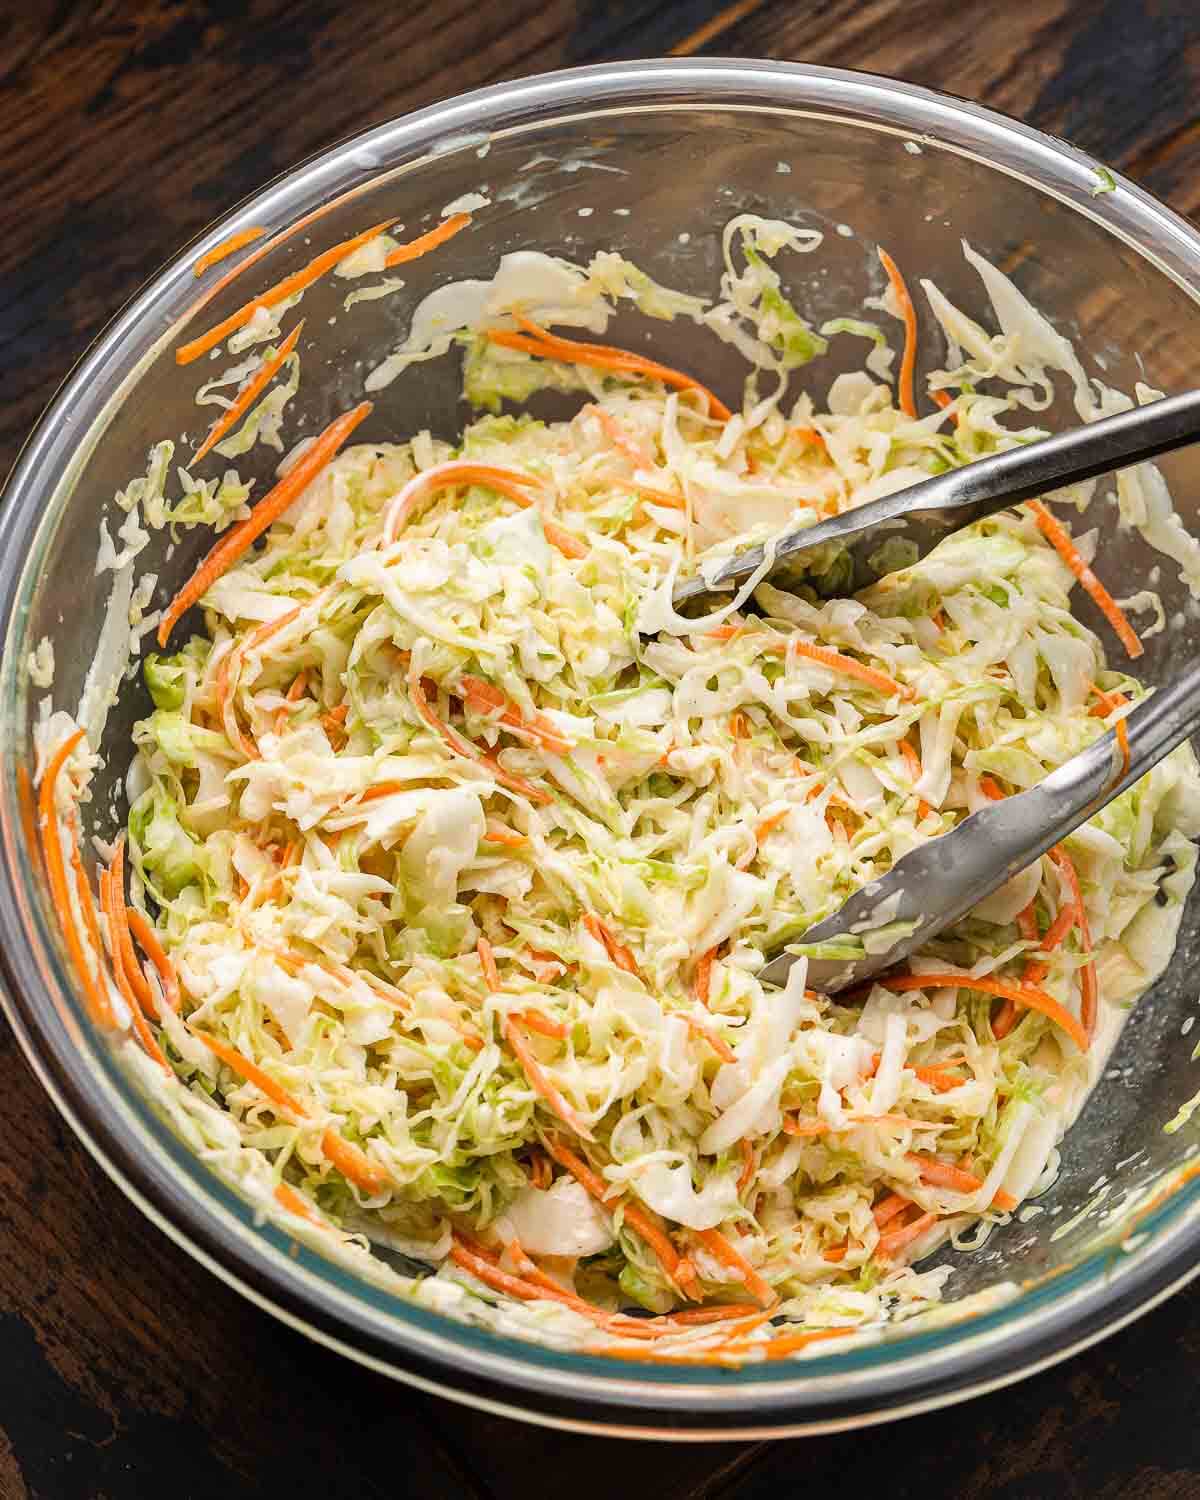 Large bowl with deli coleslaw and tongs.